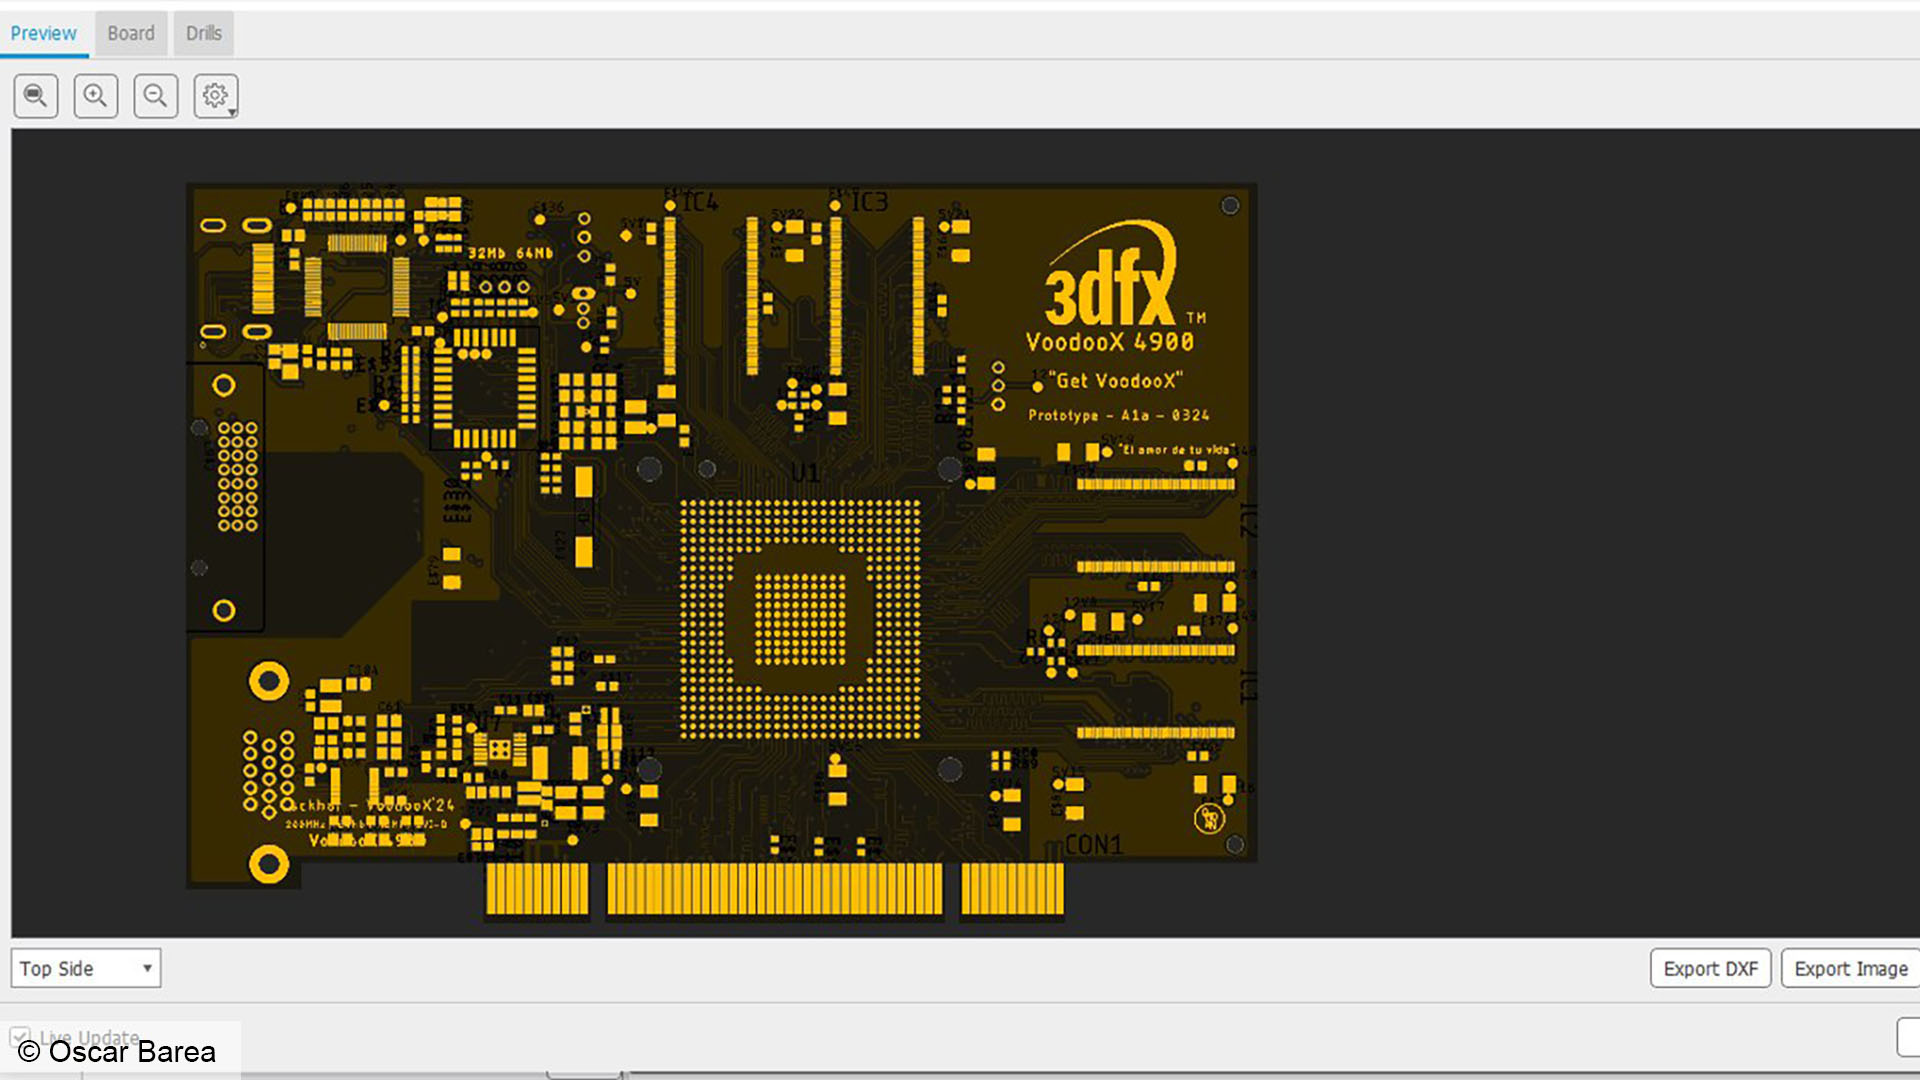 This modder just made a new 3dfx Voodoo graphics card: Custom PCB CAD design